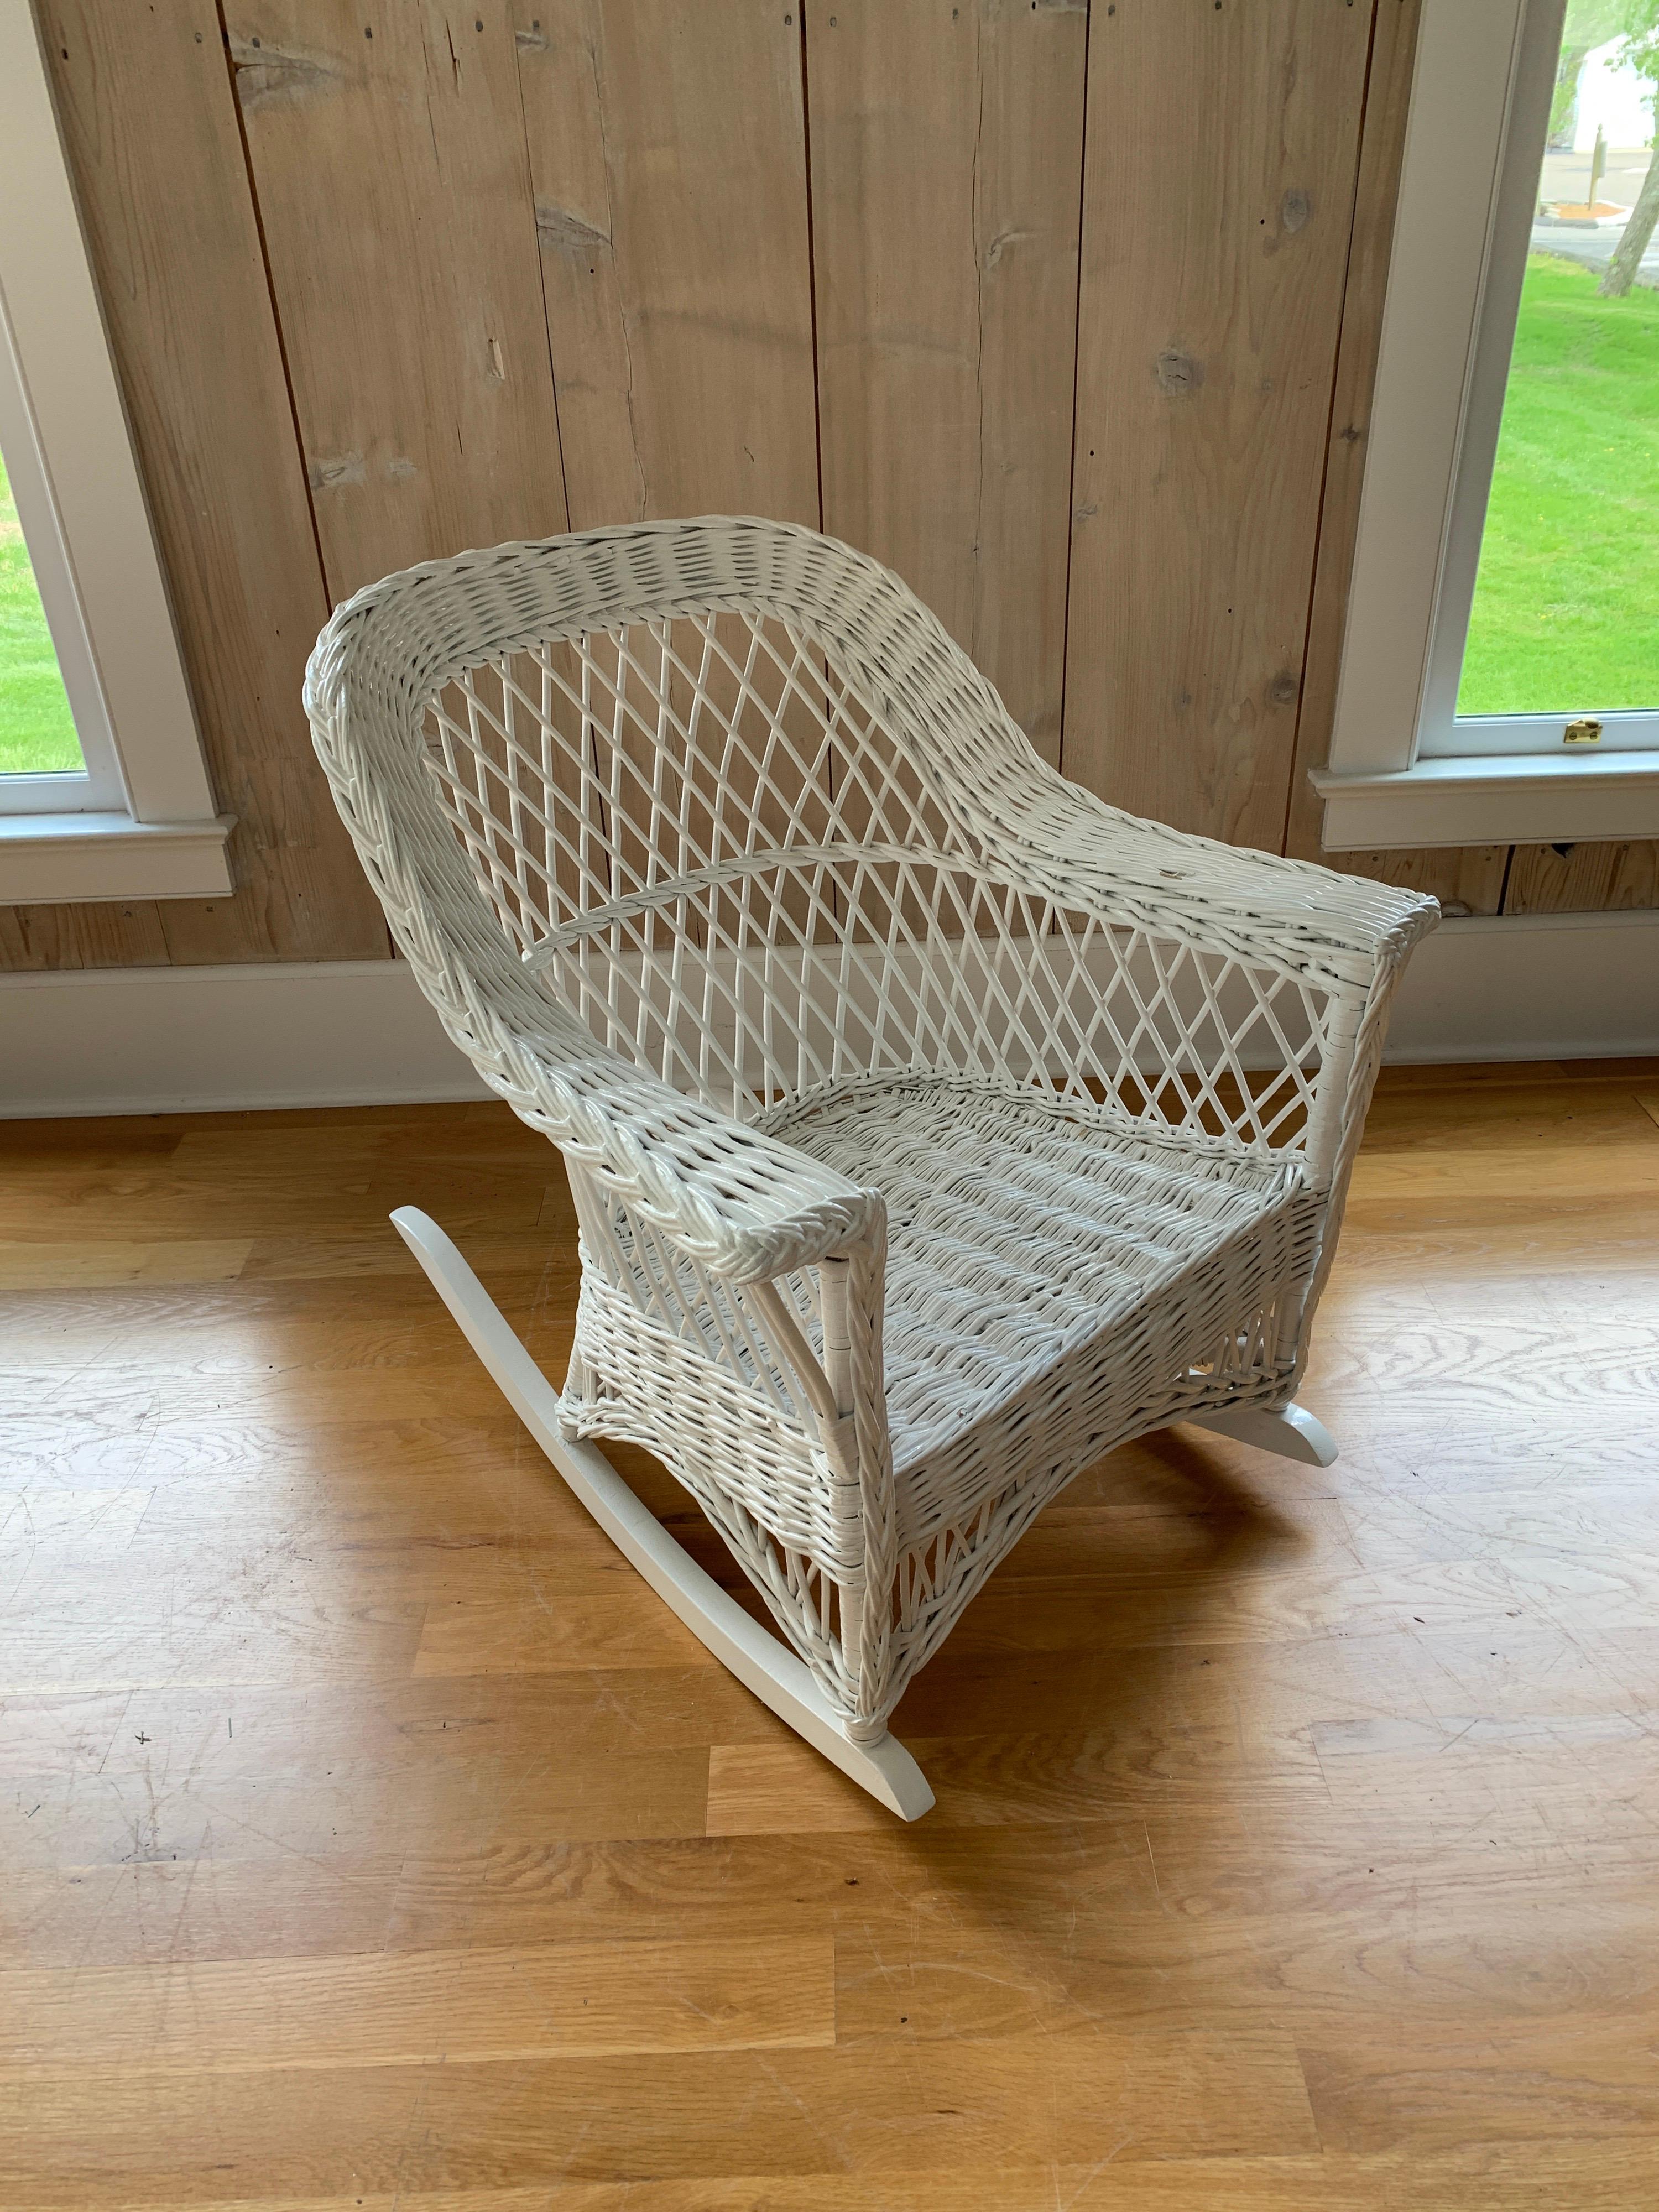 A vintage wicker rocker in the bar harbor weave woven of willow and freshly painted white. This piece measures 27.5” wide, 34” deep and 32” tall.